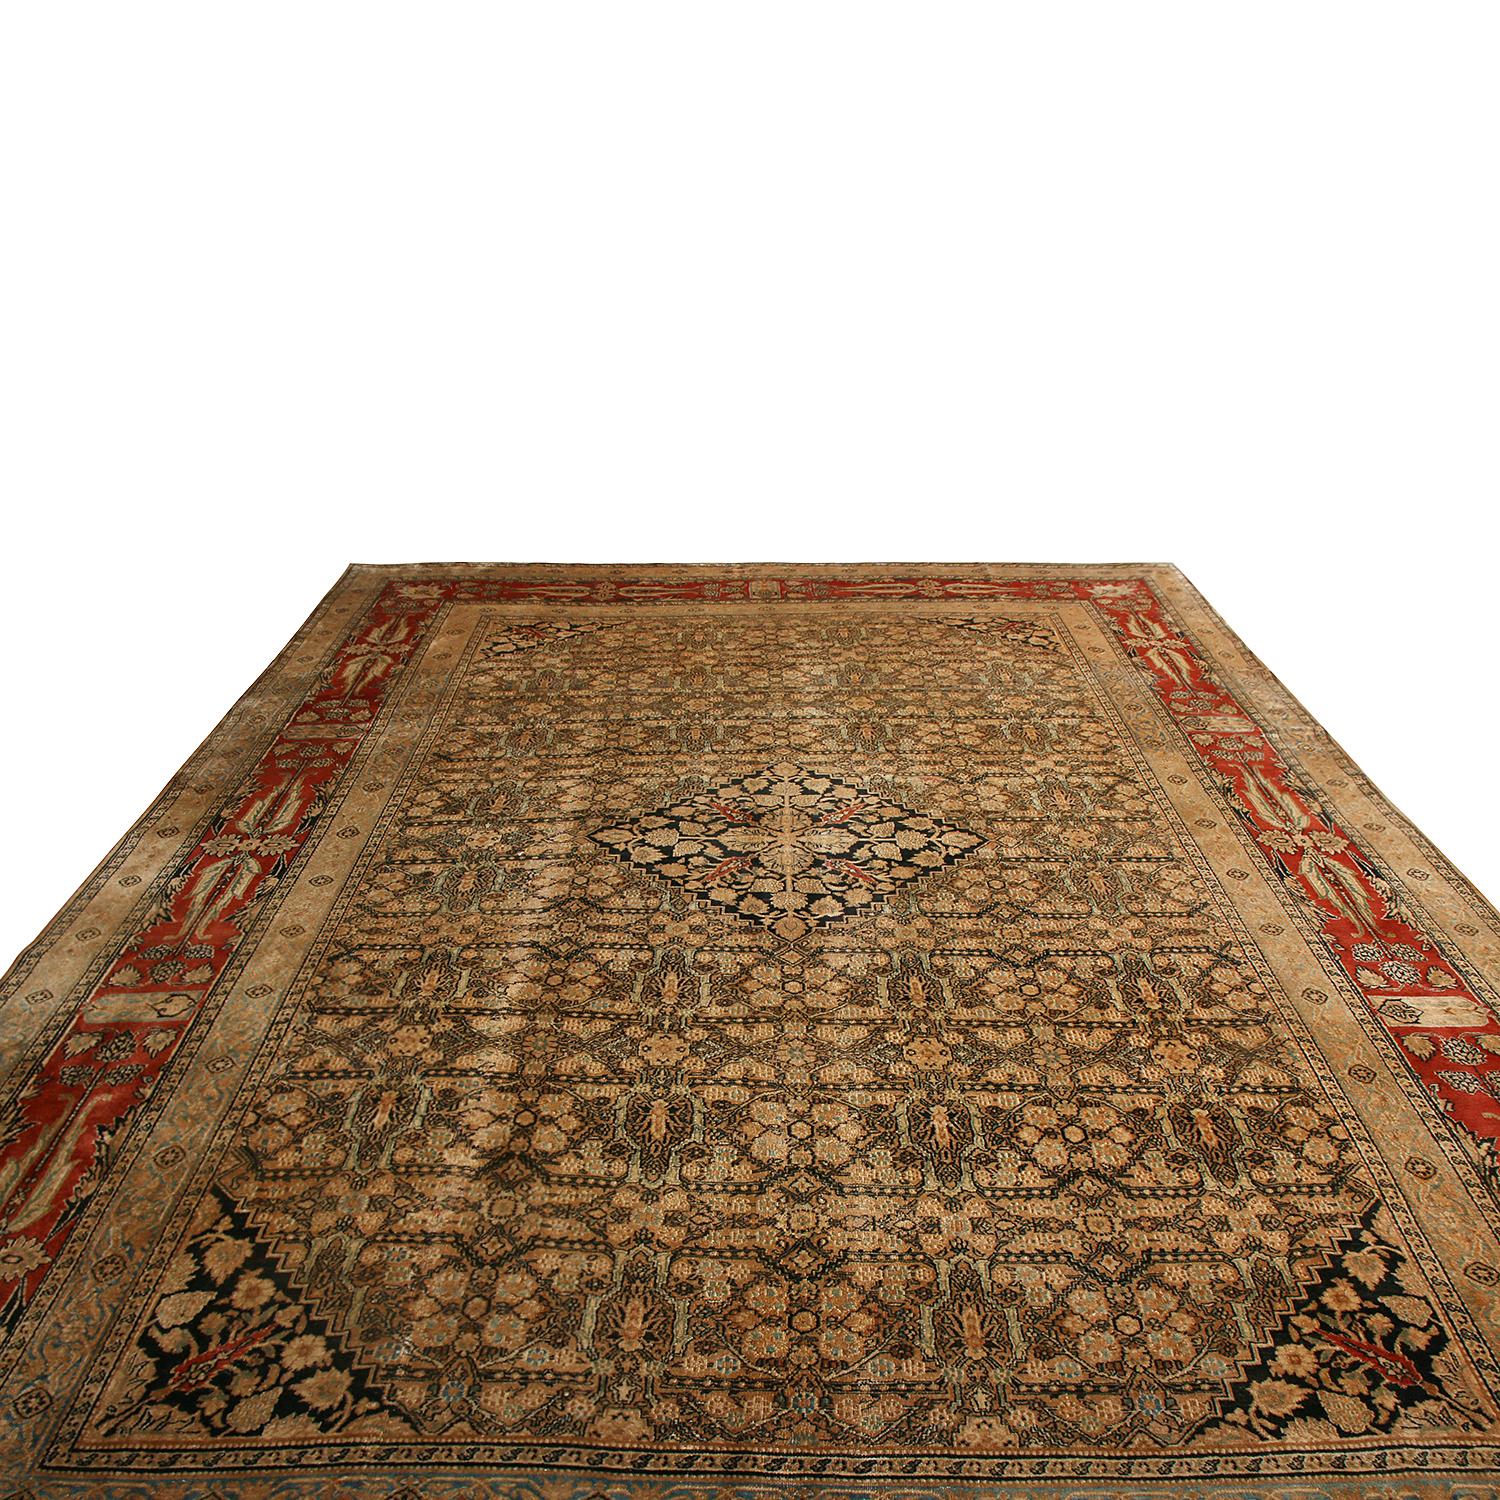 Hand knotted in Persia originating between 1870-1880, this antique Doroksh wool rug is one of the most idyllic examples of meticulous traditional drawing among its family, commonly referred to as the ideal decorator’s carpet among collectors. The